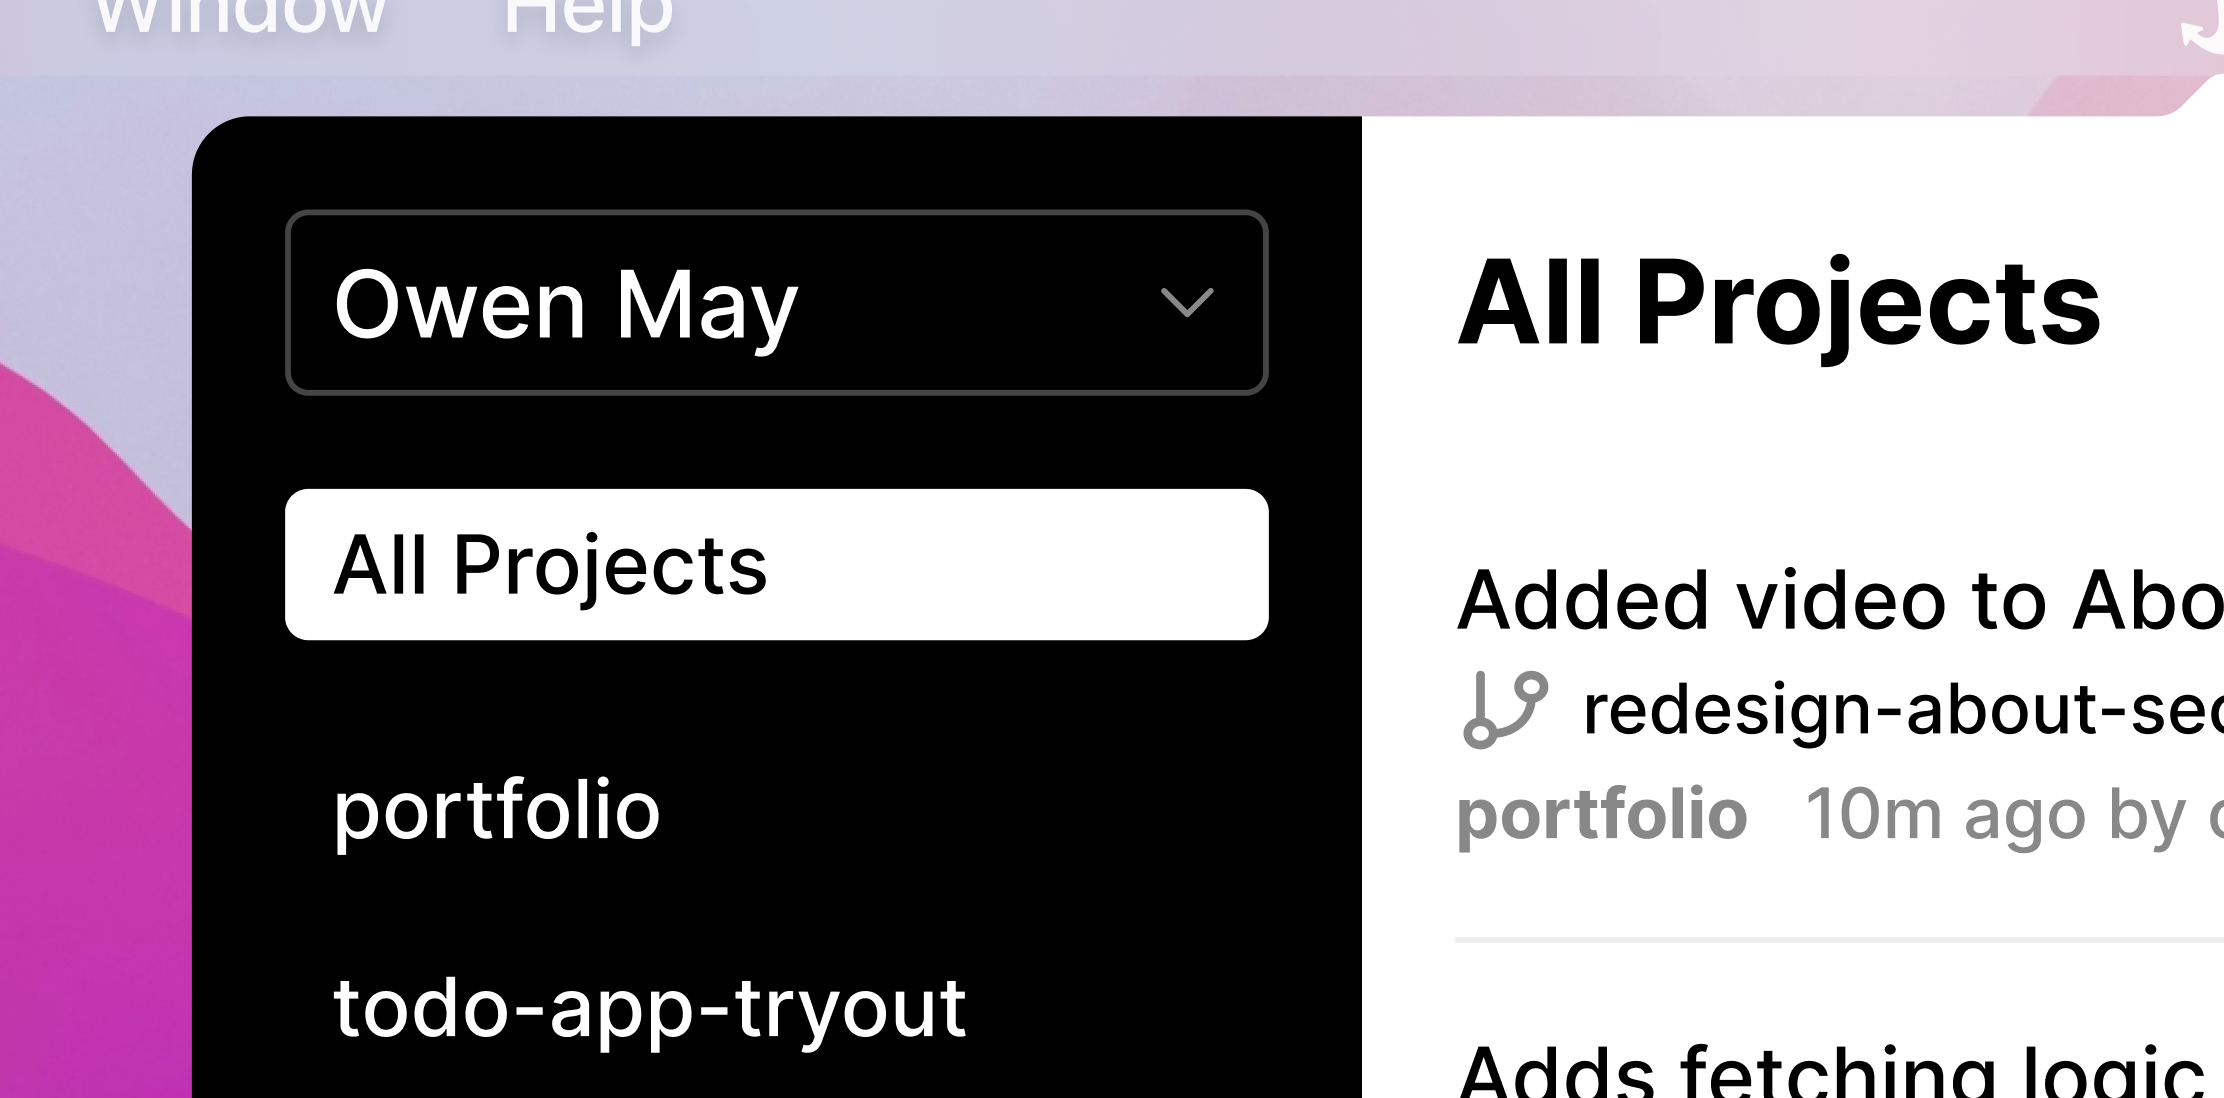 A screenshot of Shiplog, zoomed in on its sidebar. The "All Projects" item is selected, followed by the projects "portfolio", "todo-app-tryout", and "tech-blog".